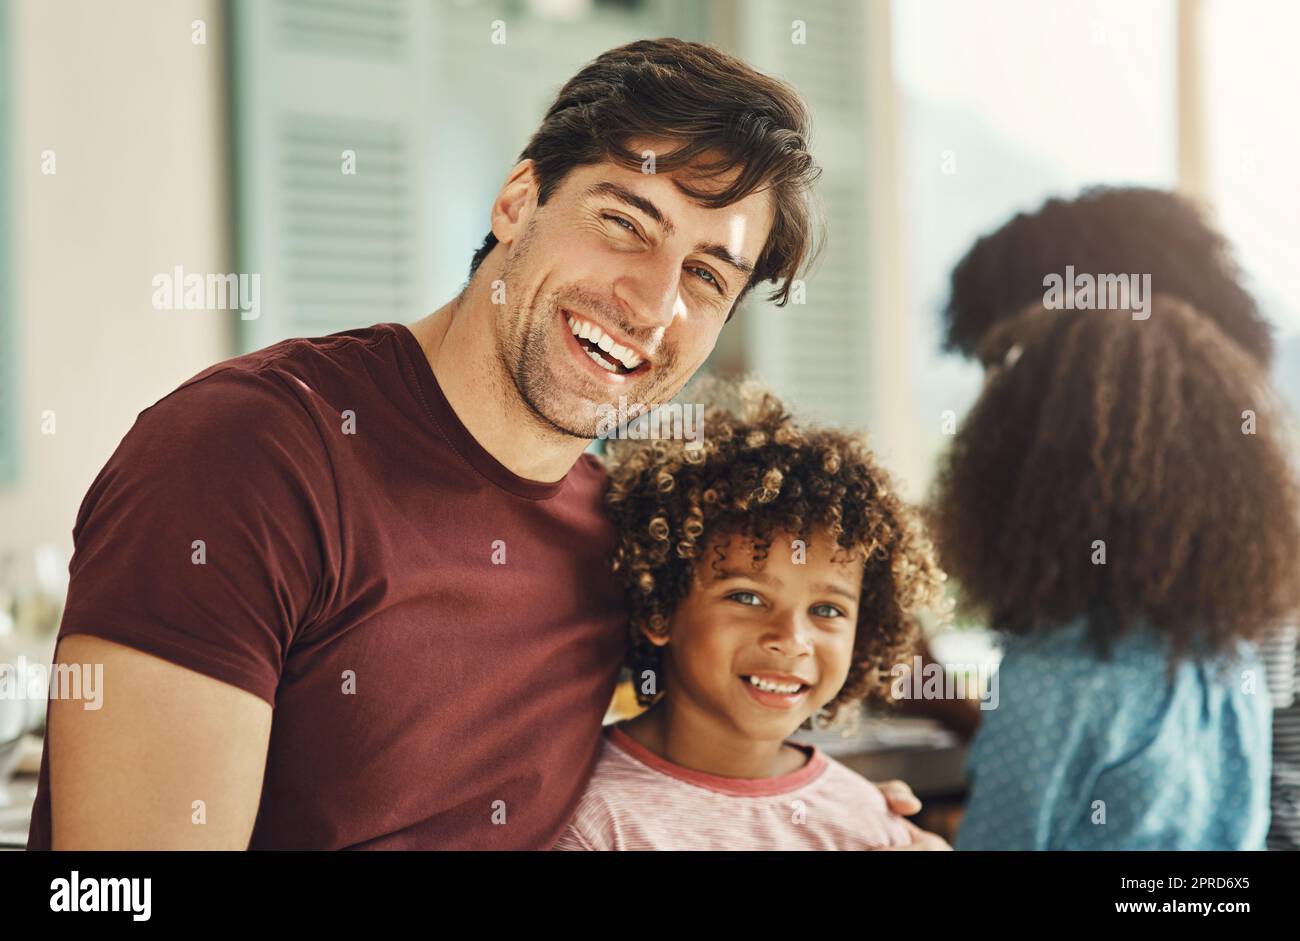 Looking after the family with my little man. Portrait of a cheerful father and son bonding during a family gathering at home. Stock Photo